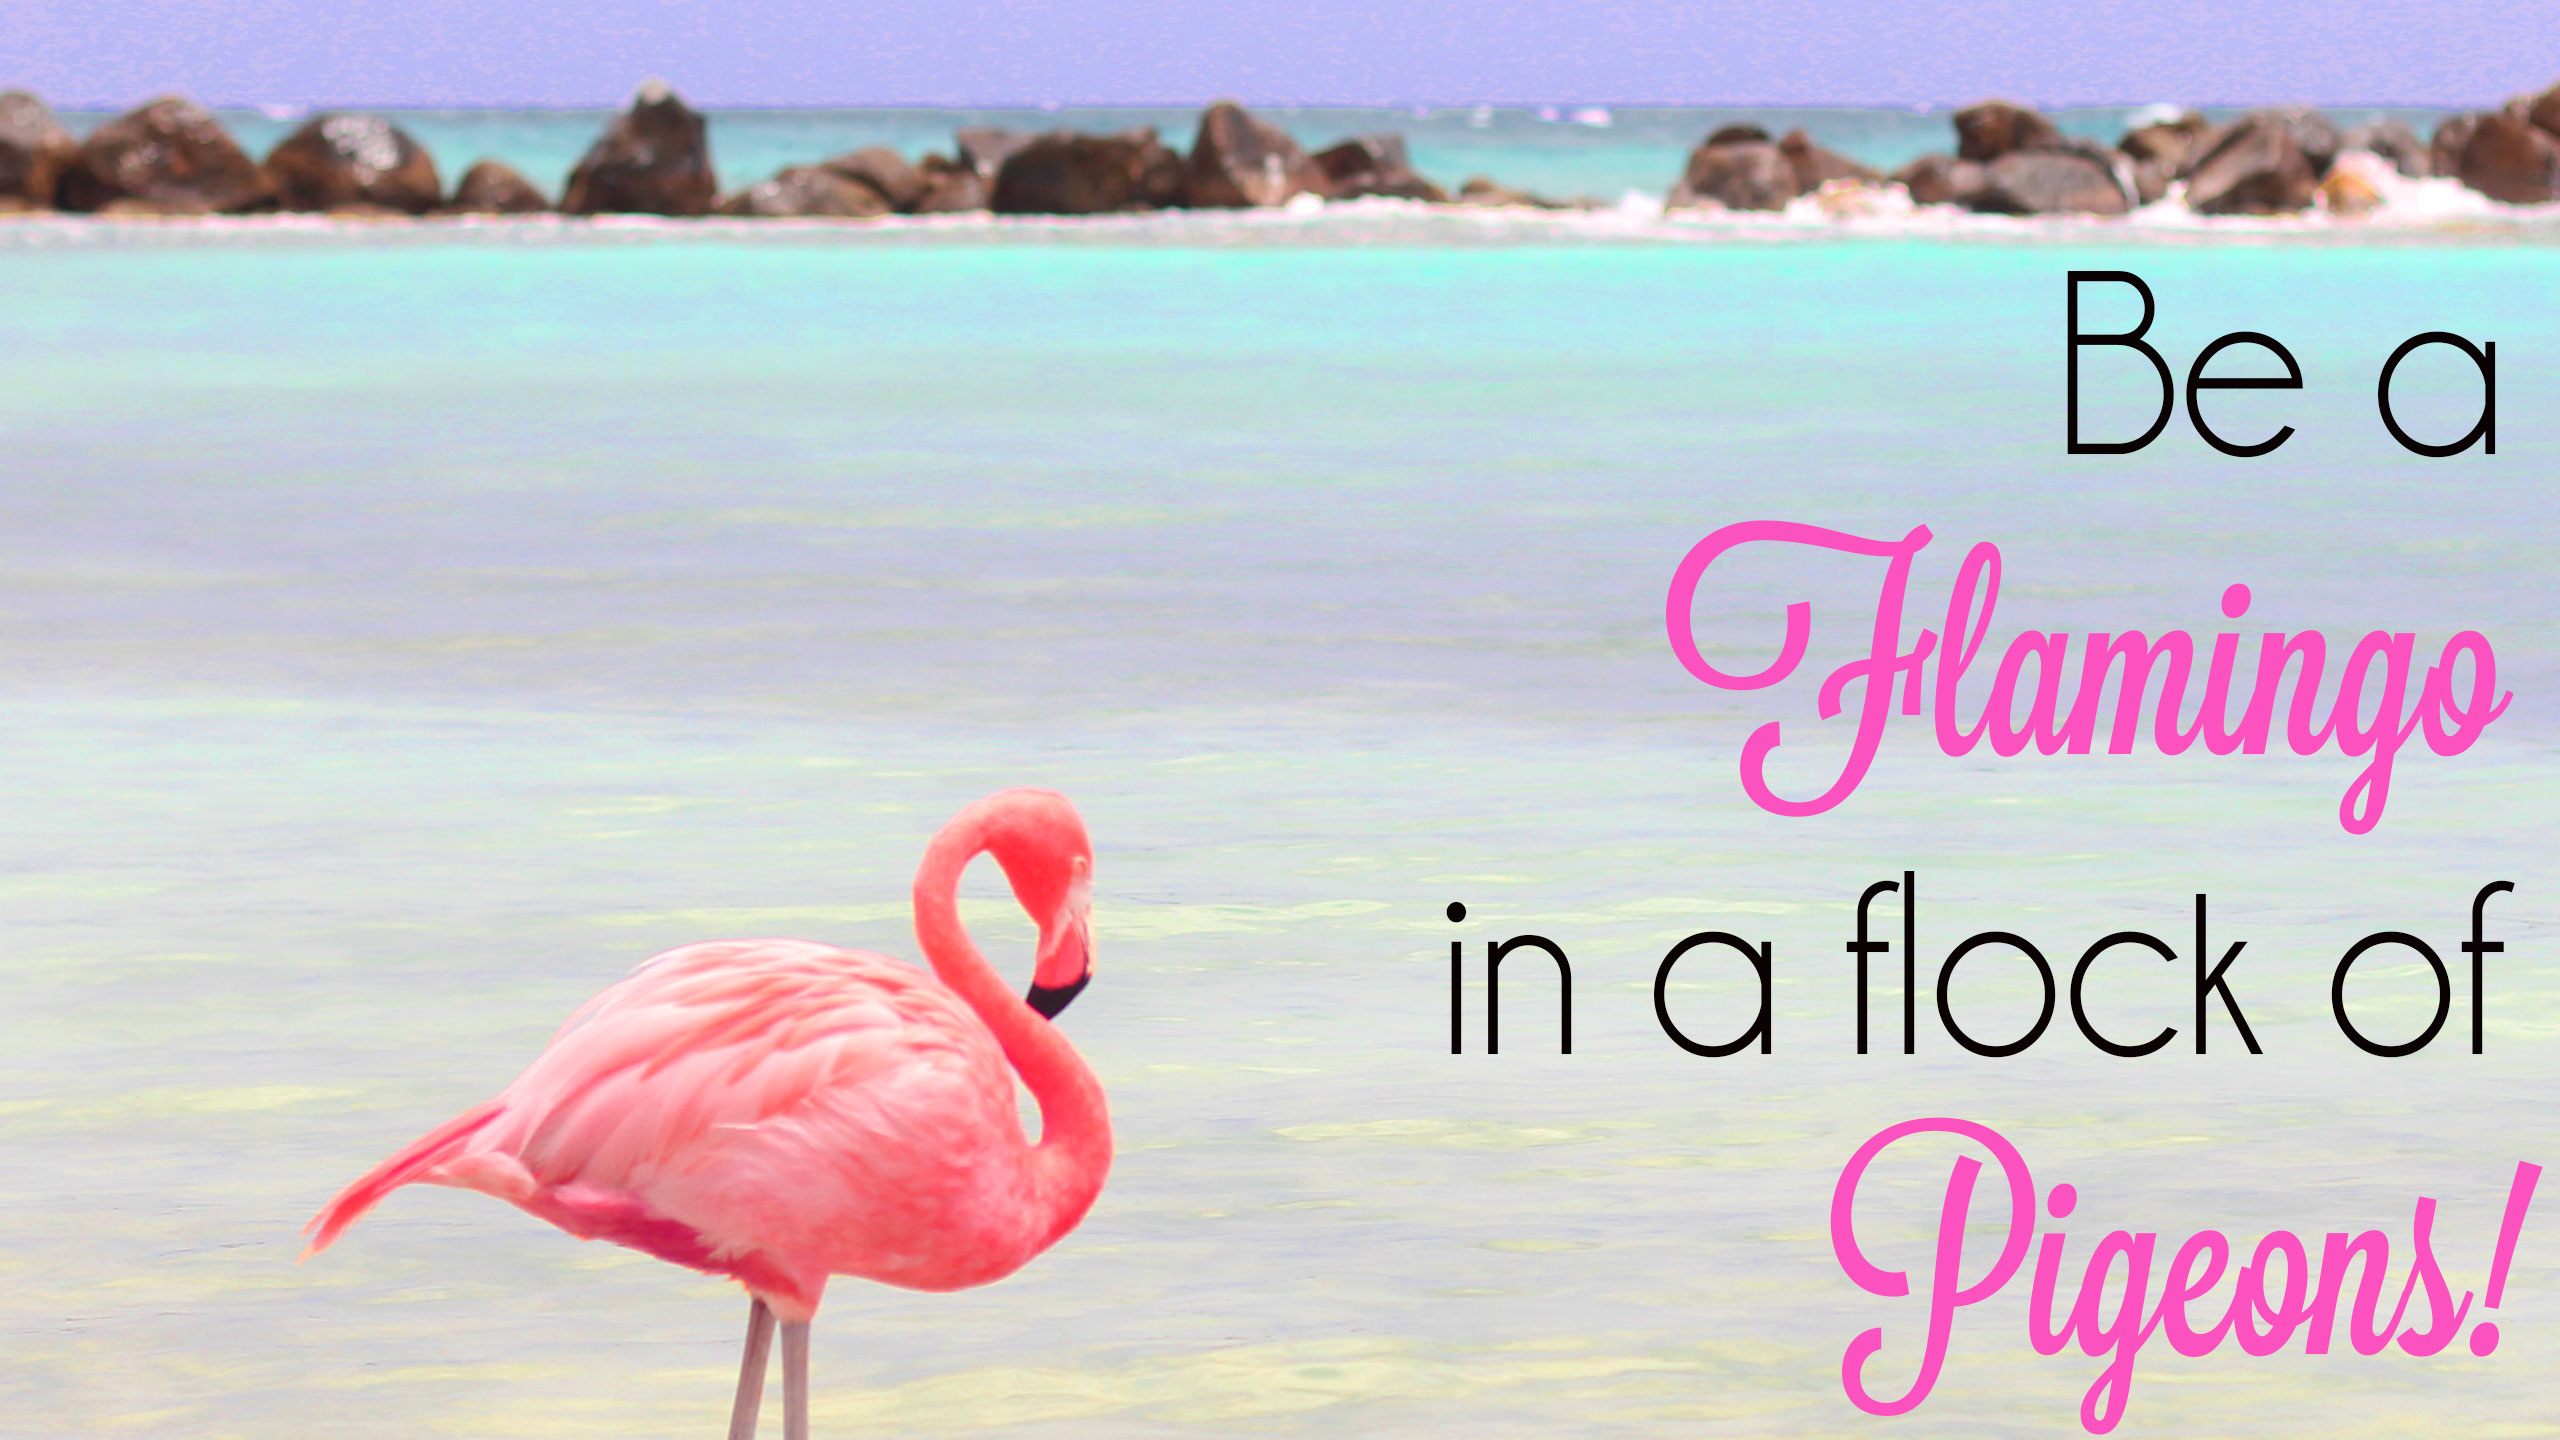 Free Pink Flamingo Computer Wallpaper Be A Flamingo Flamingo In A Flock Of Pigeons Meaning 3608 Hd Wallpaper Backgrounds Download